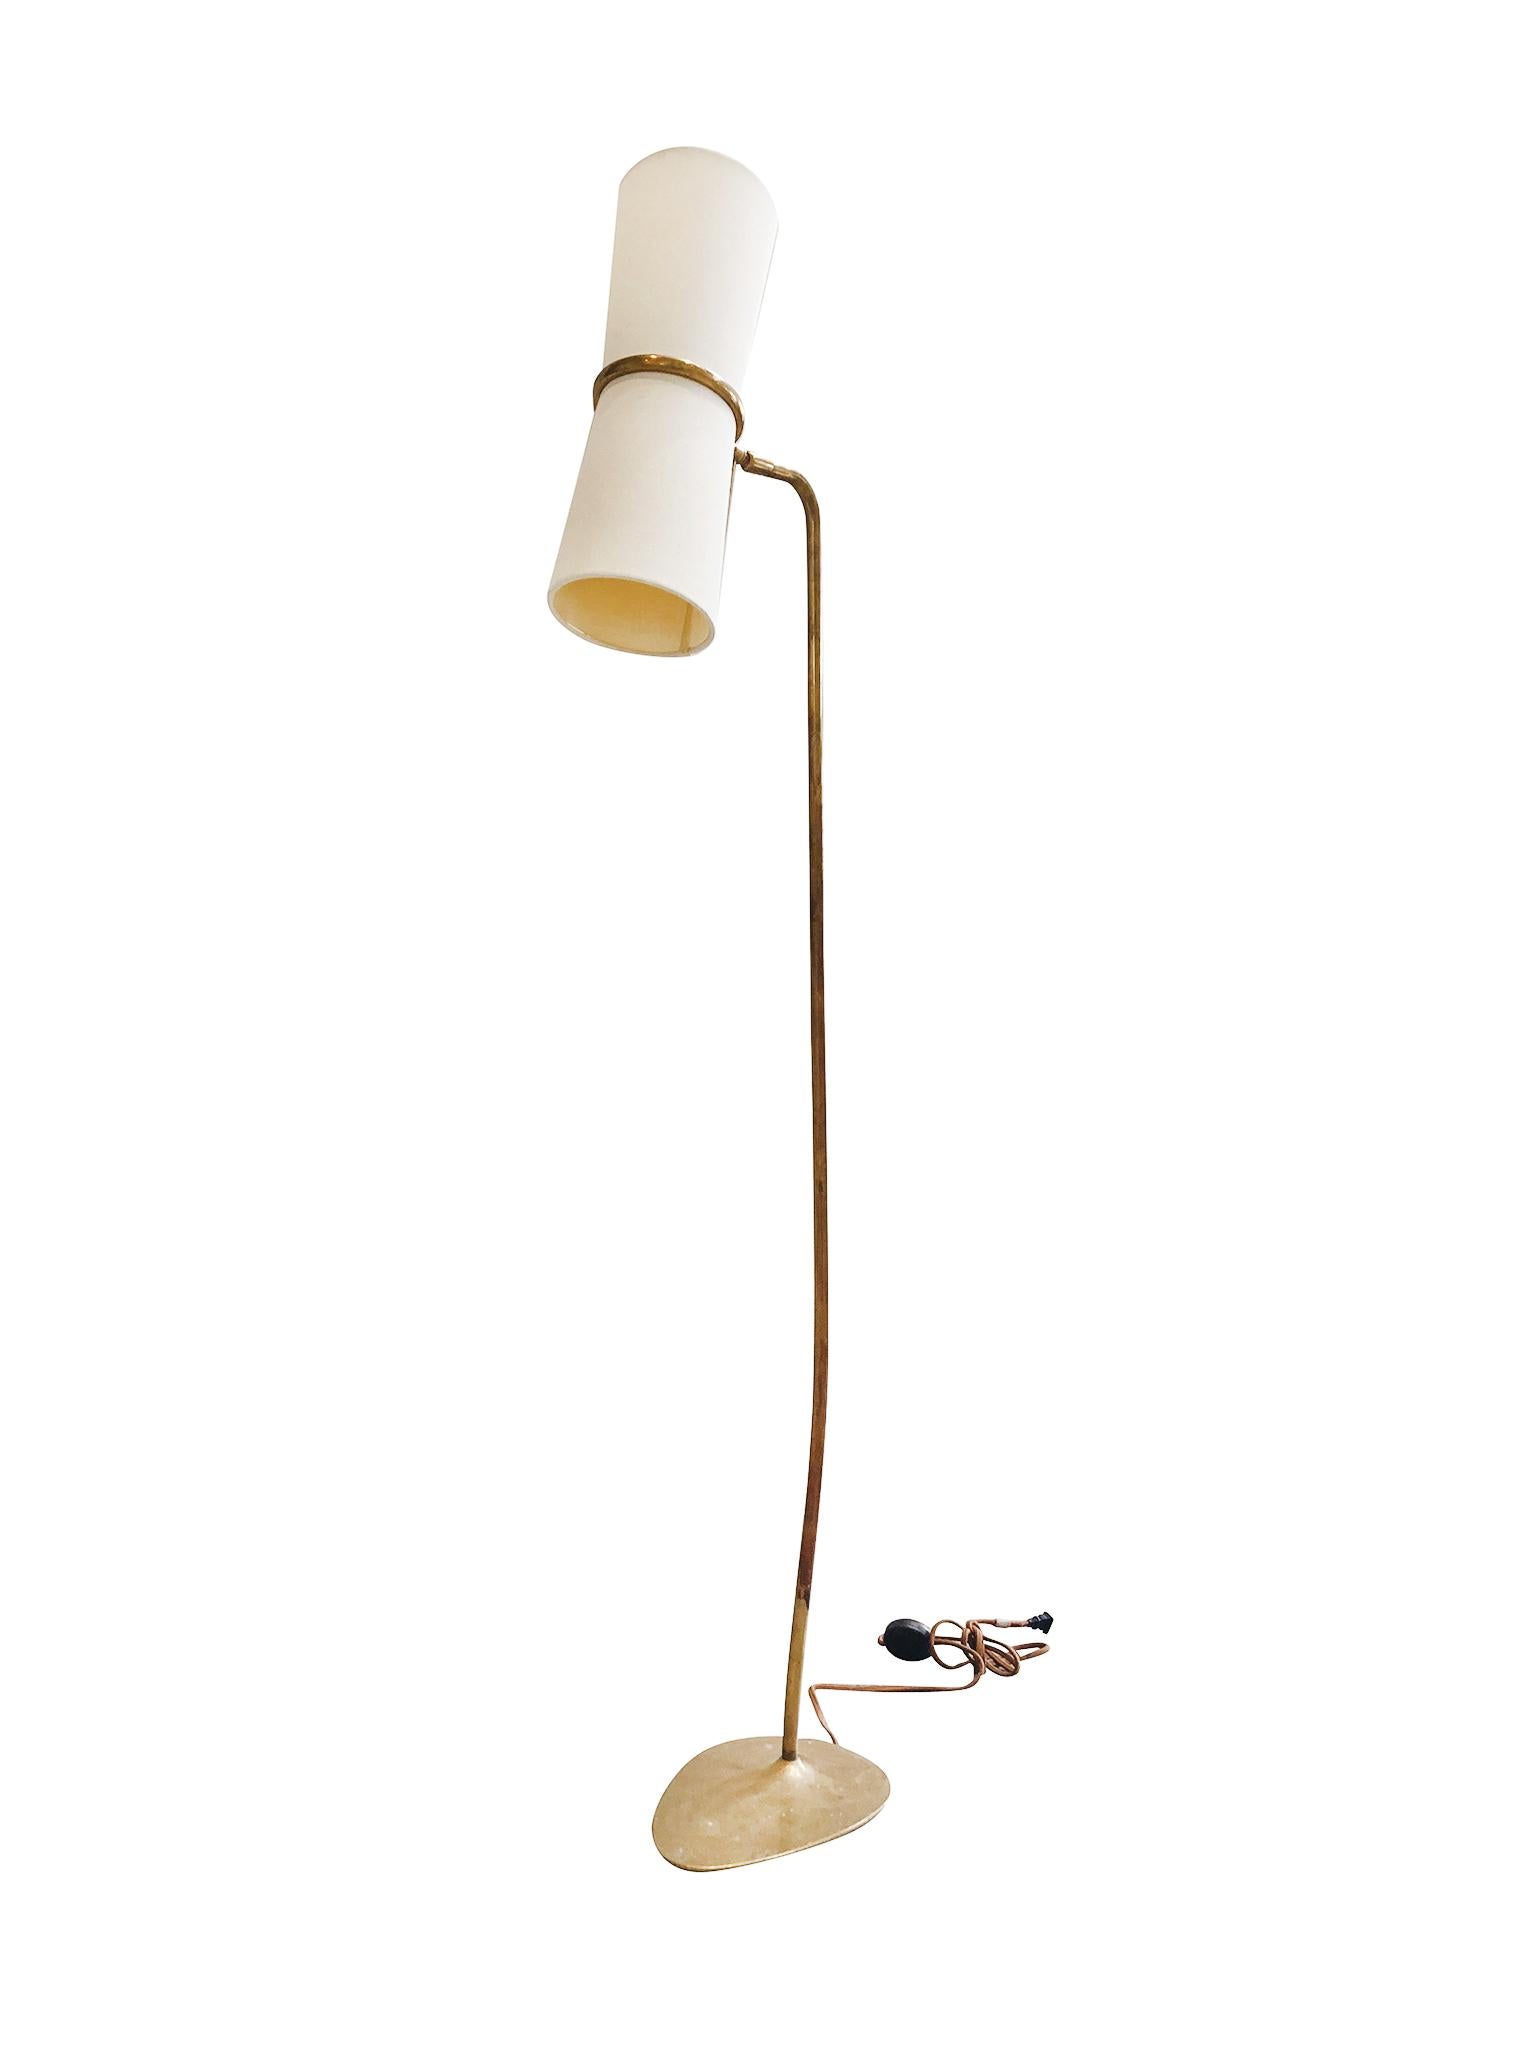 Midcentury Modern brass floor lamp with a long stem-like body and a flat oval-shaped base. The double-head consists of a top and bottom socket. A small white linen shade fits over each socket. The lamp is newly rewired.

Dimensions:
58 in.